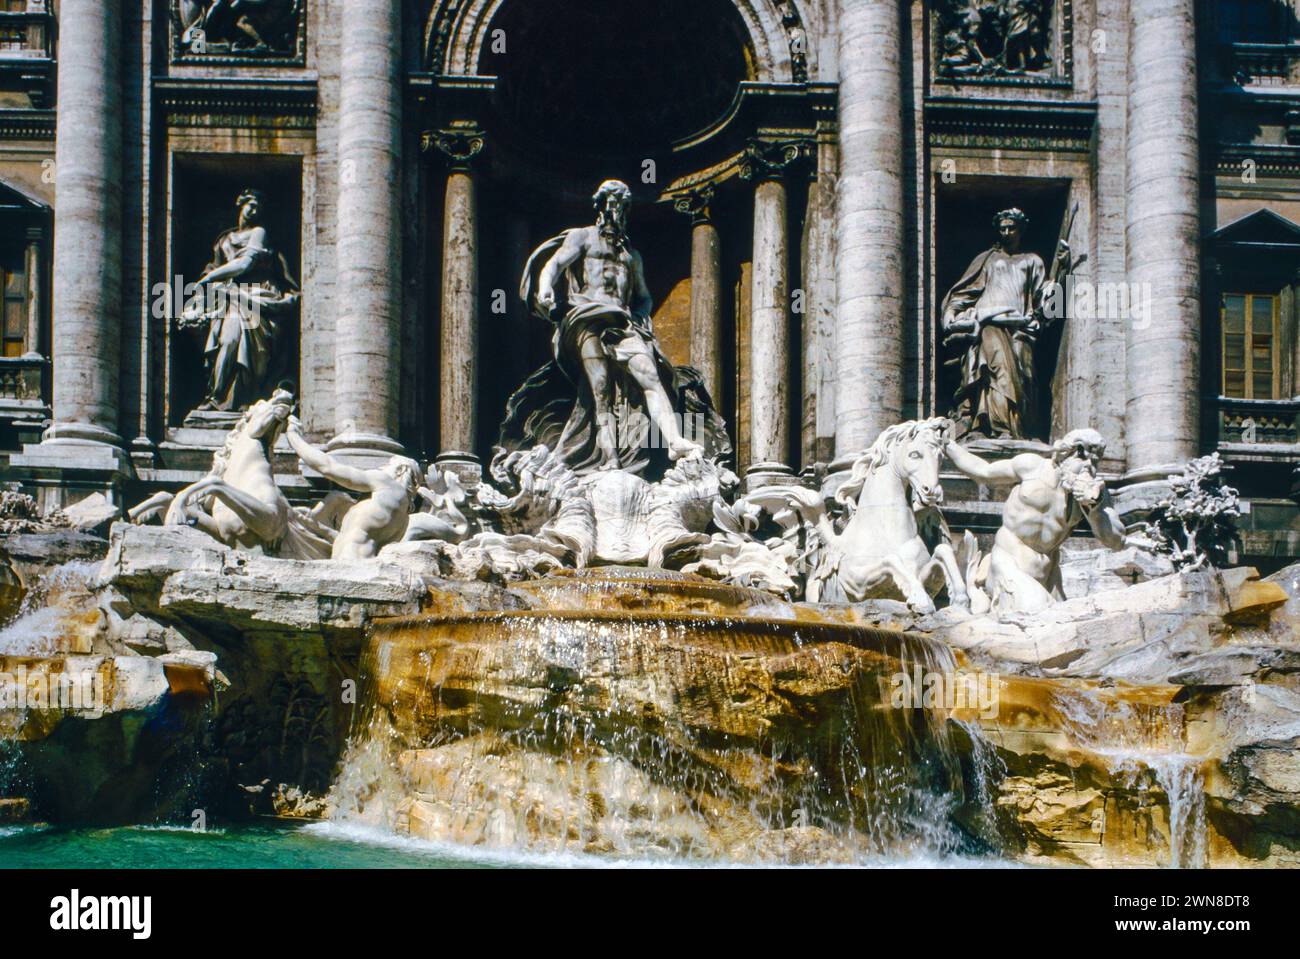 Marble sculptures in the famous Trevi Fountain in Rome, Italy. Stock Photo